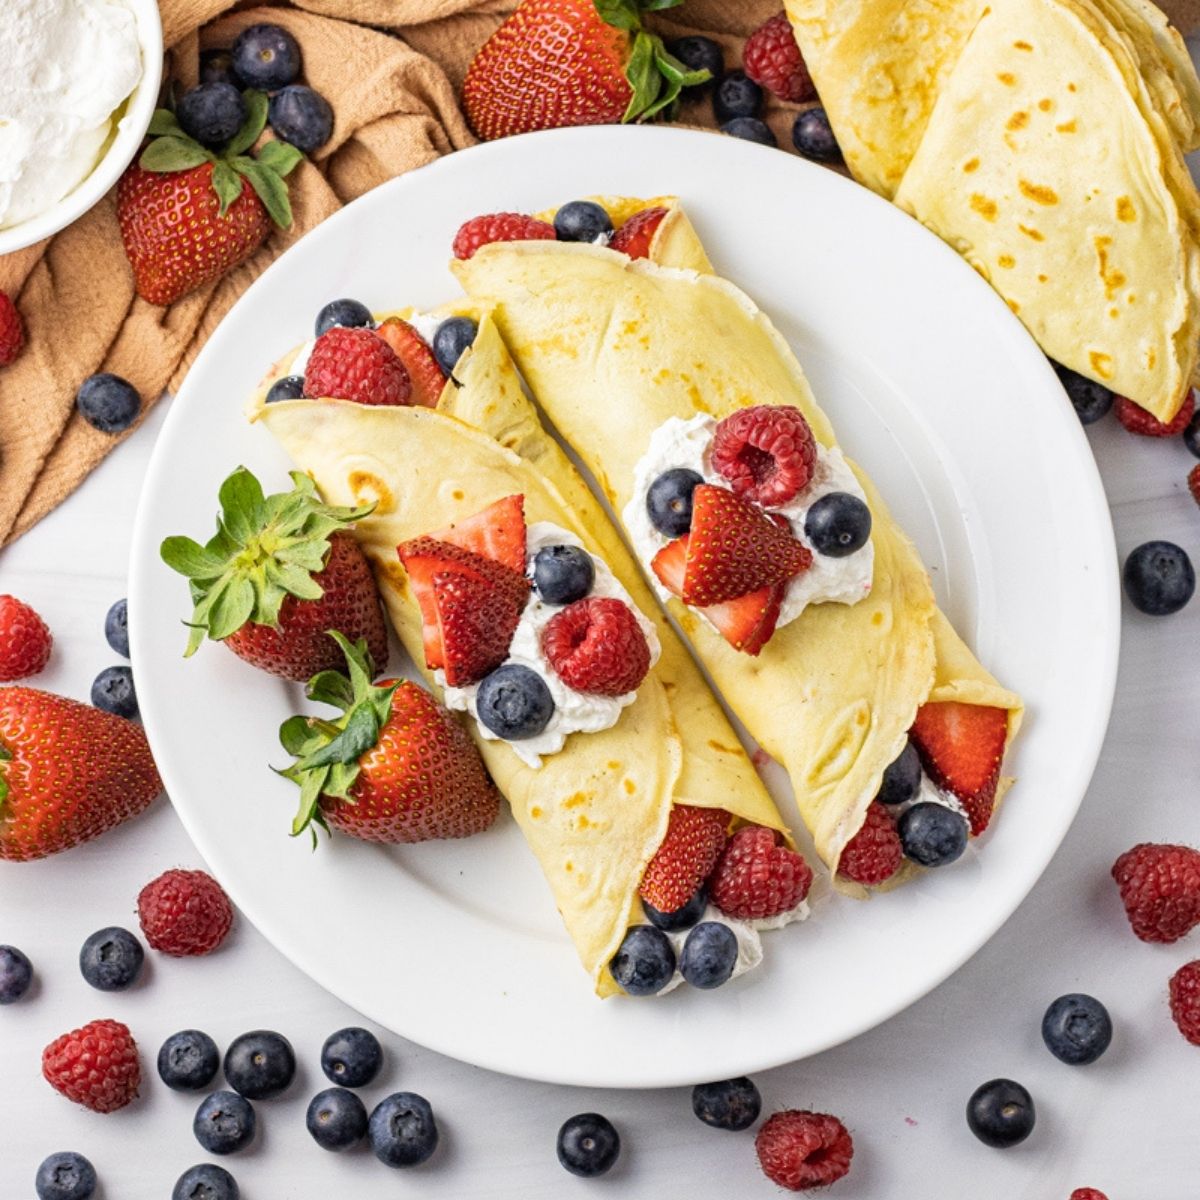 crepes filled with berries and whipped cream on a white plate